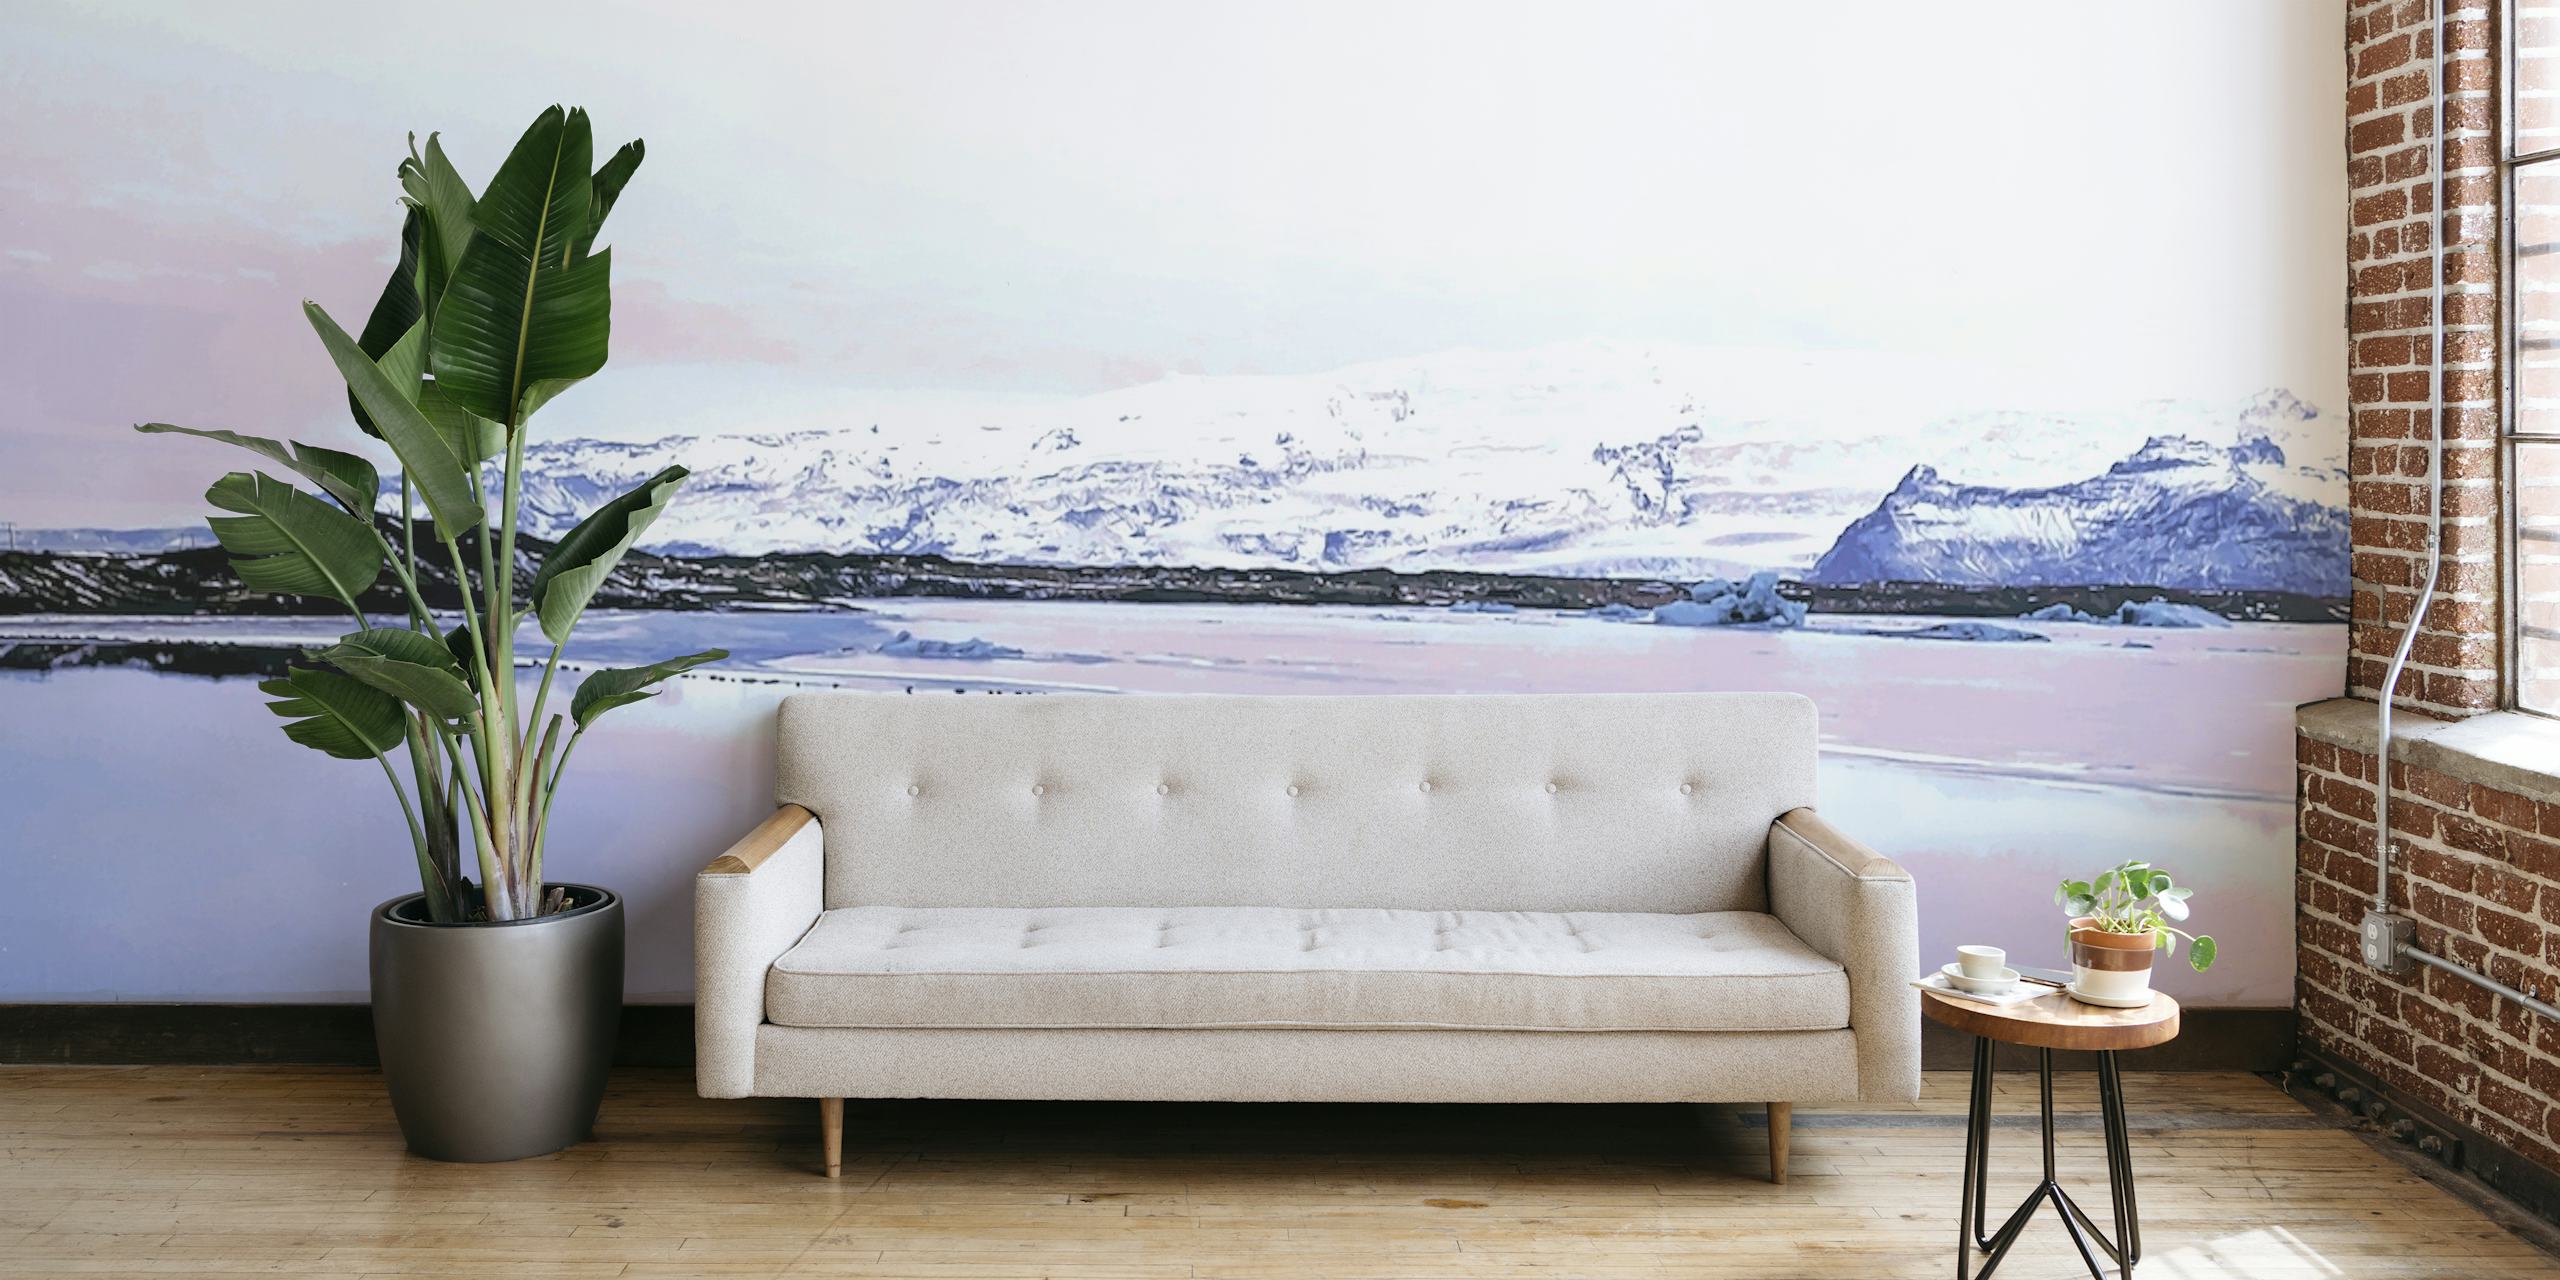 Icelandic landscape wall mural with snowy mountains and water reflections